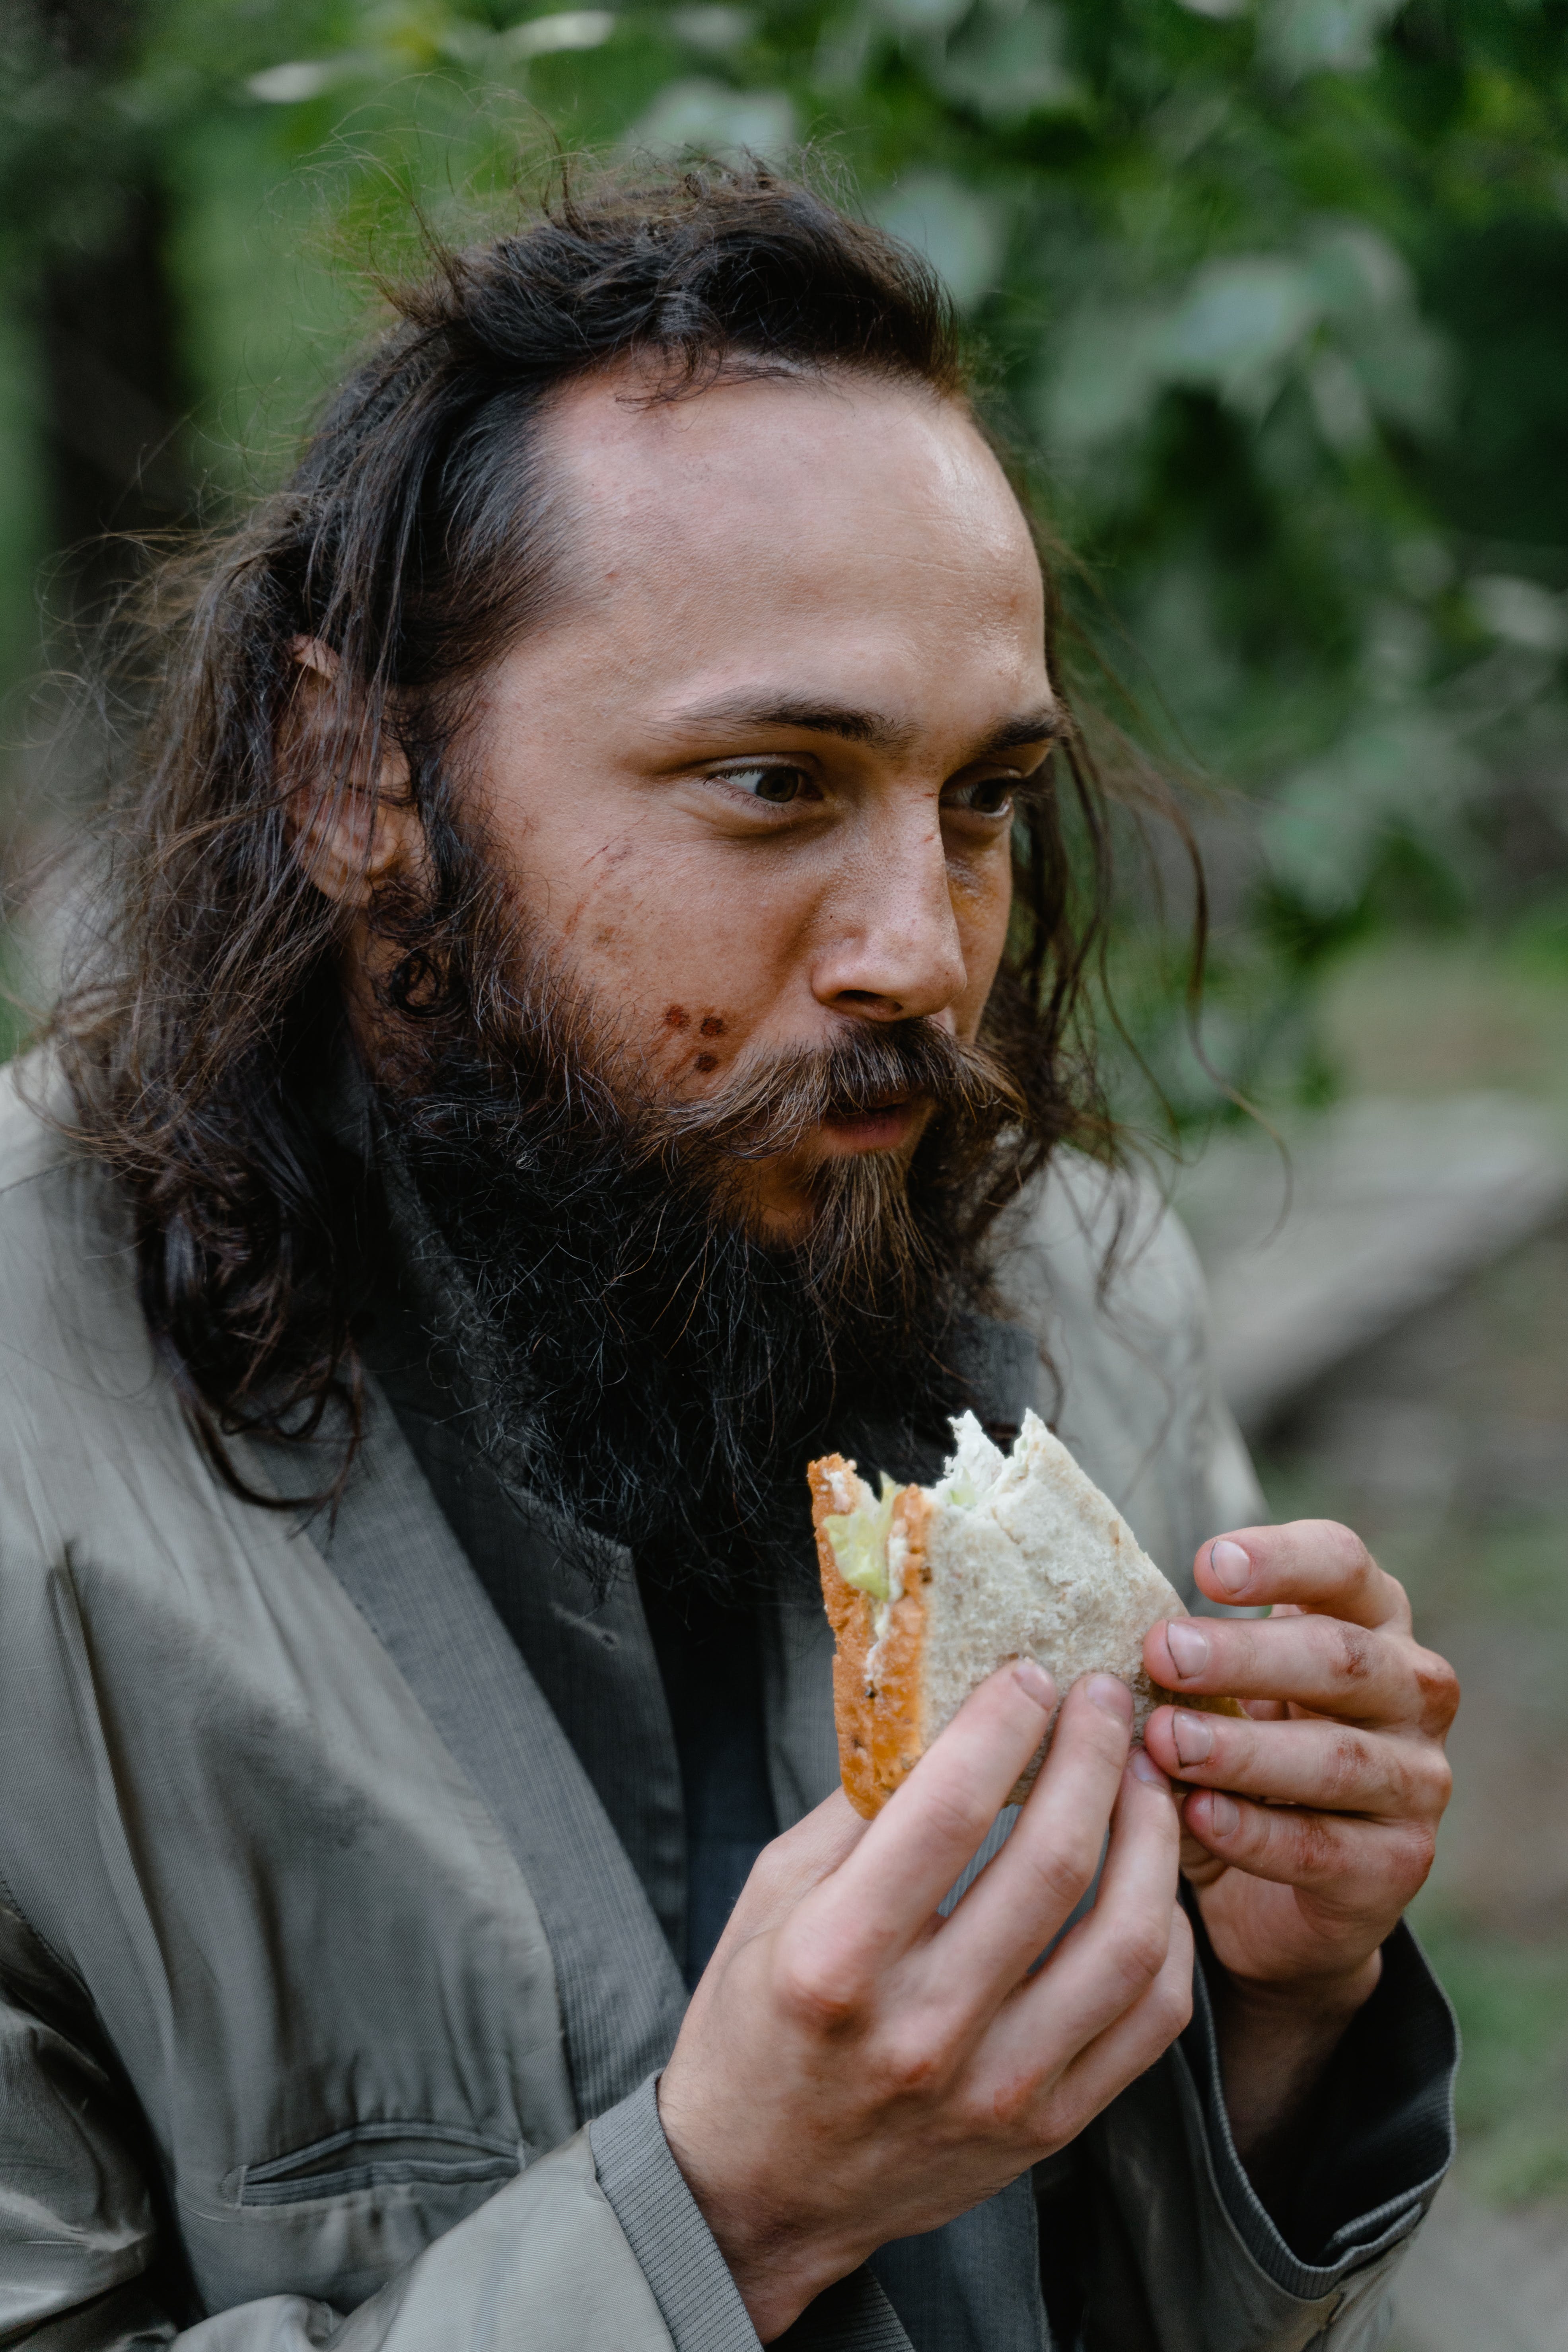 A homeless man looking happy while eating some food | Source: Pexels